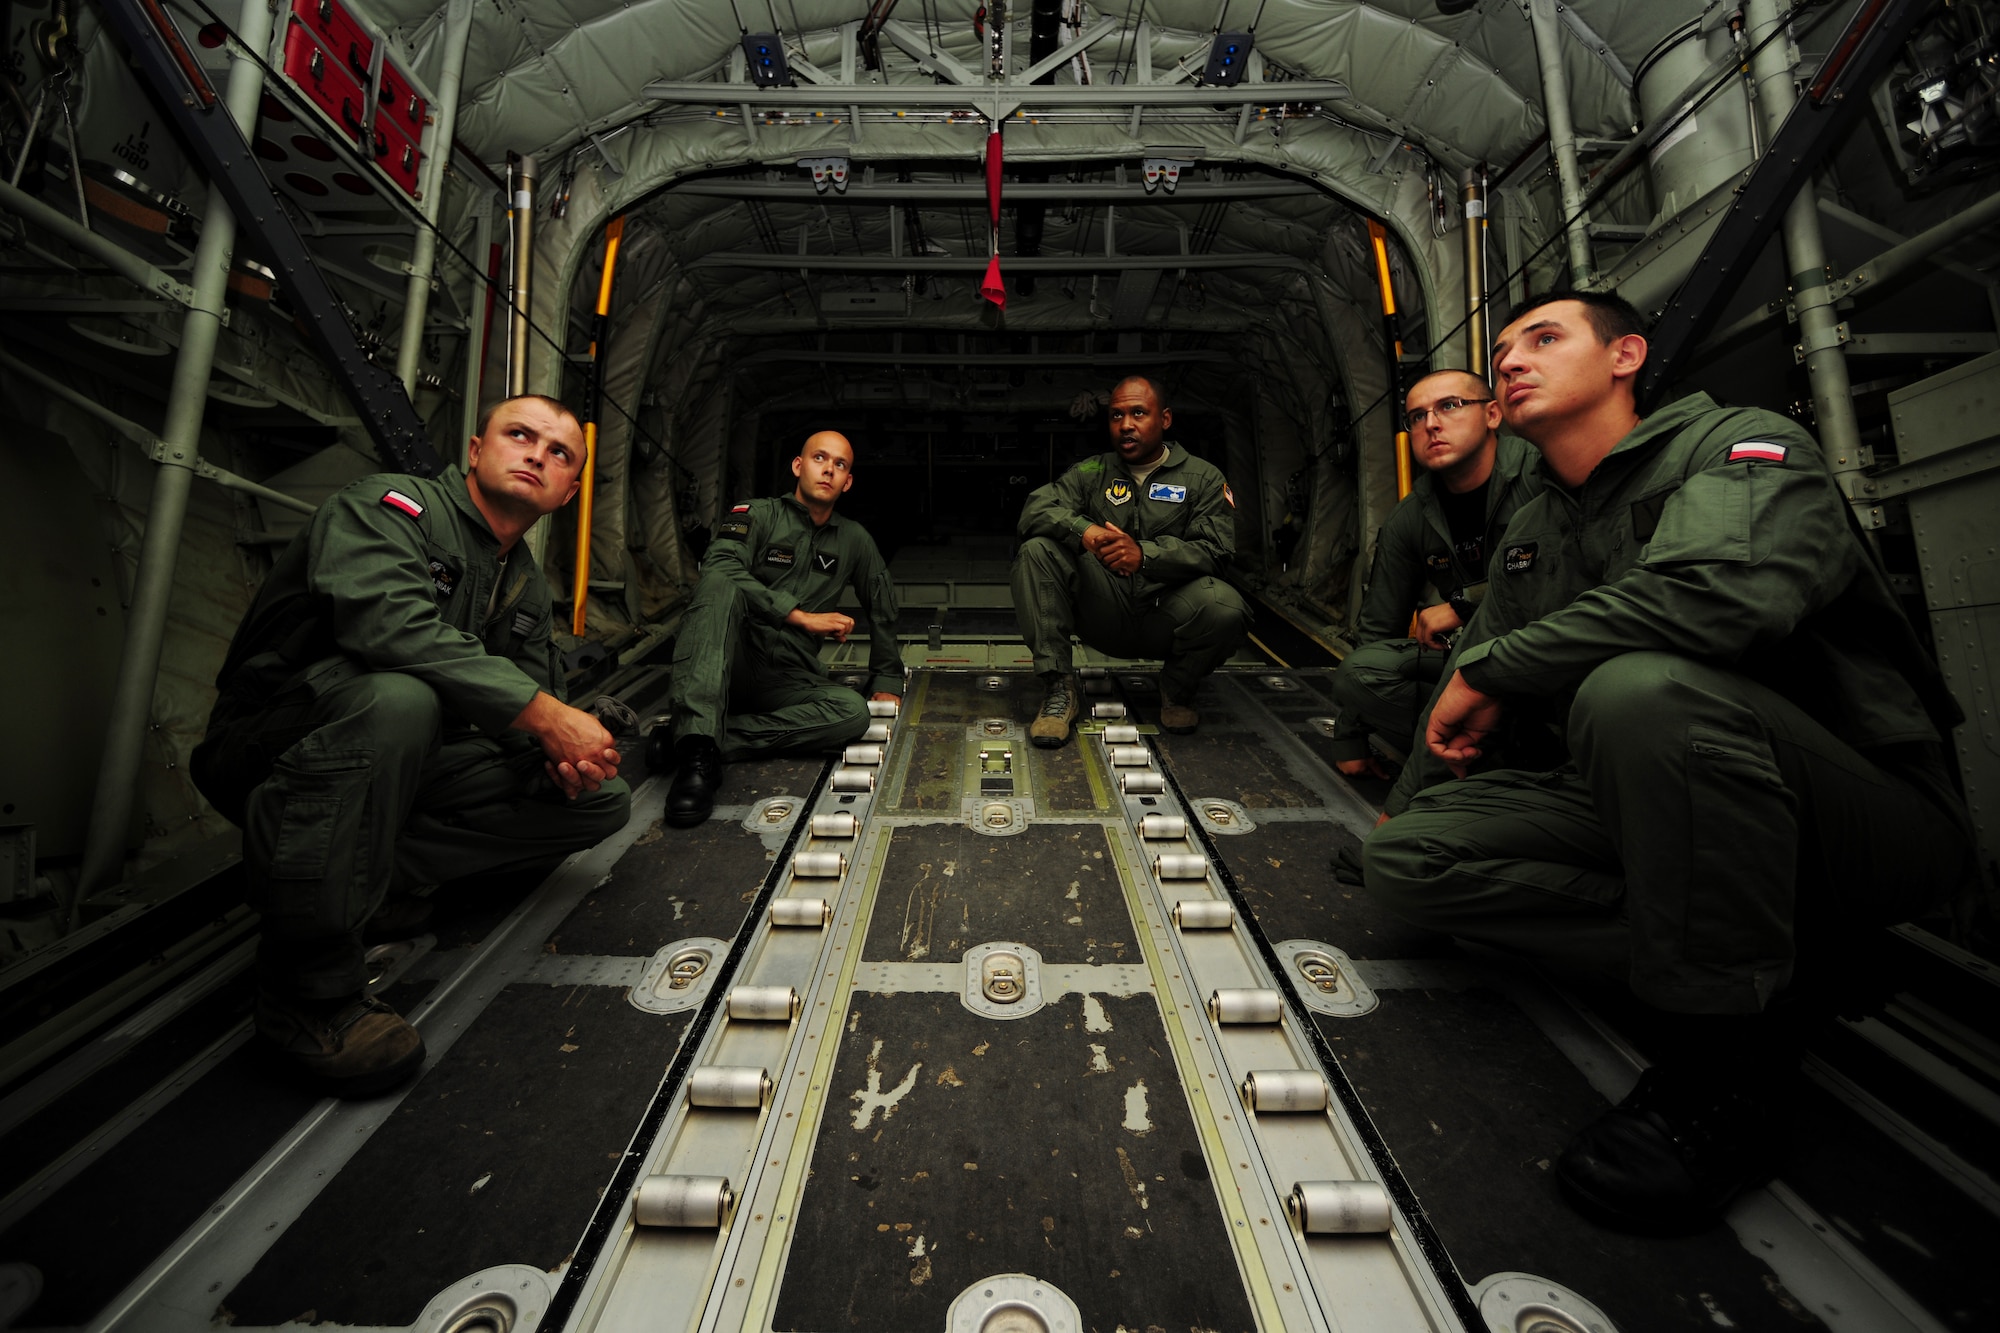 Master Sgt. Chris Minnifield, center right, discusses the finer points of C-130 Hercules mass container delivery airdrop operations with Polish air force service members Aug. 11, 2014, at Powidz Air Base, Poland. The bilateral training was to prepare Polish forces to conduct equipment and supply delivery missions to Iraq. Minnifield is a 37th Airlift Squadron loadmaster. (U.S. Air Force photo/Staff Sgt. Jarad A. Denton)